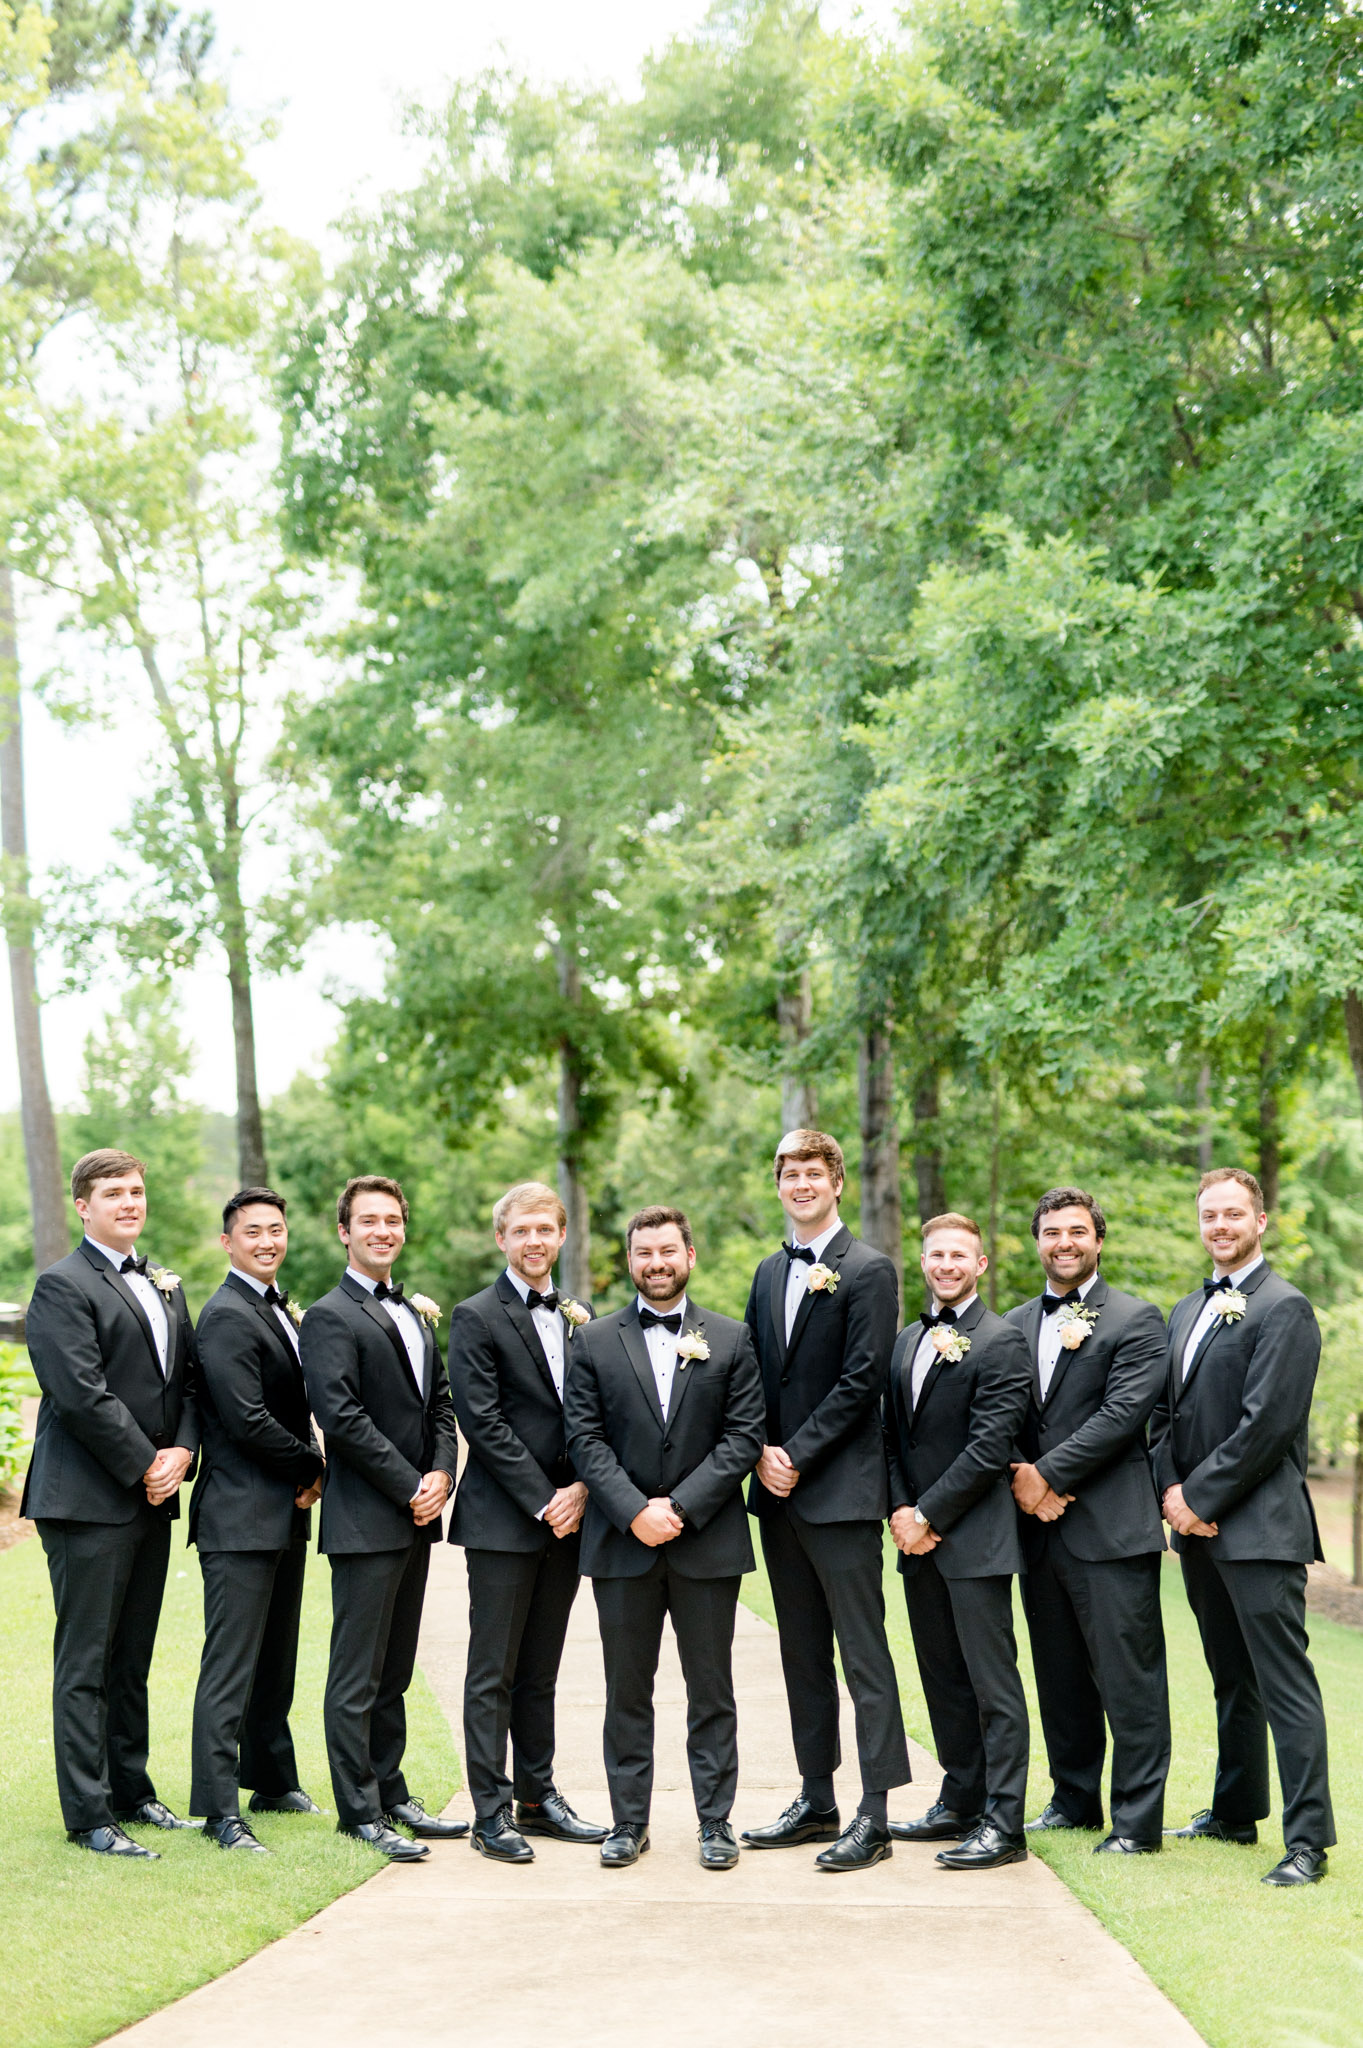 Groom stands with groomsmen smile at camera.